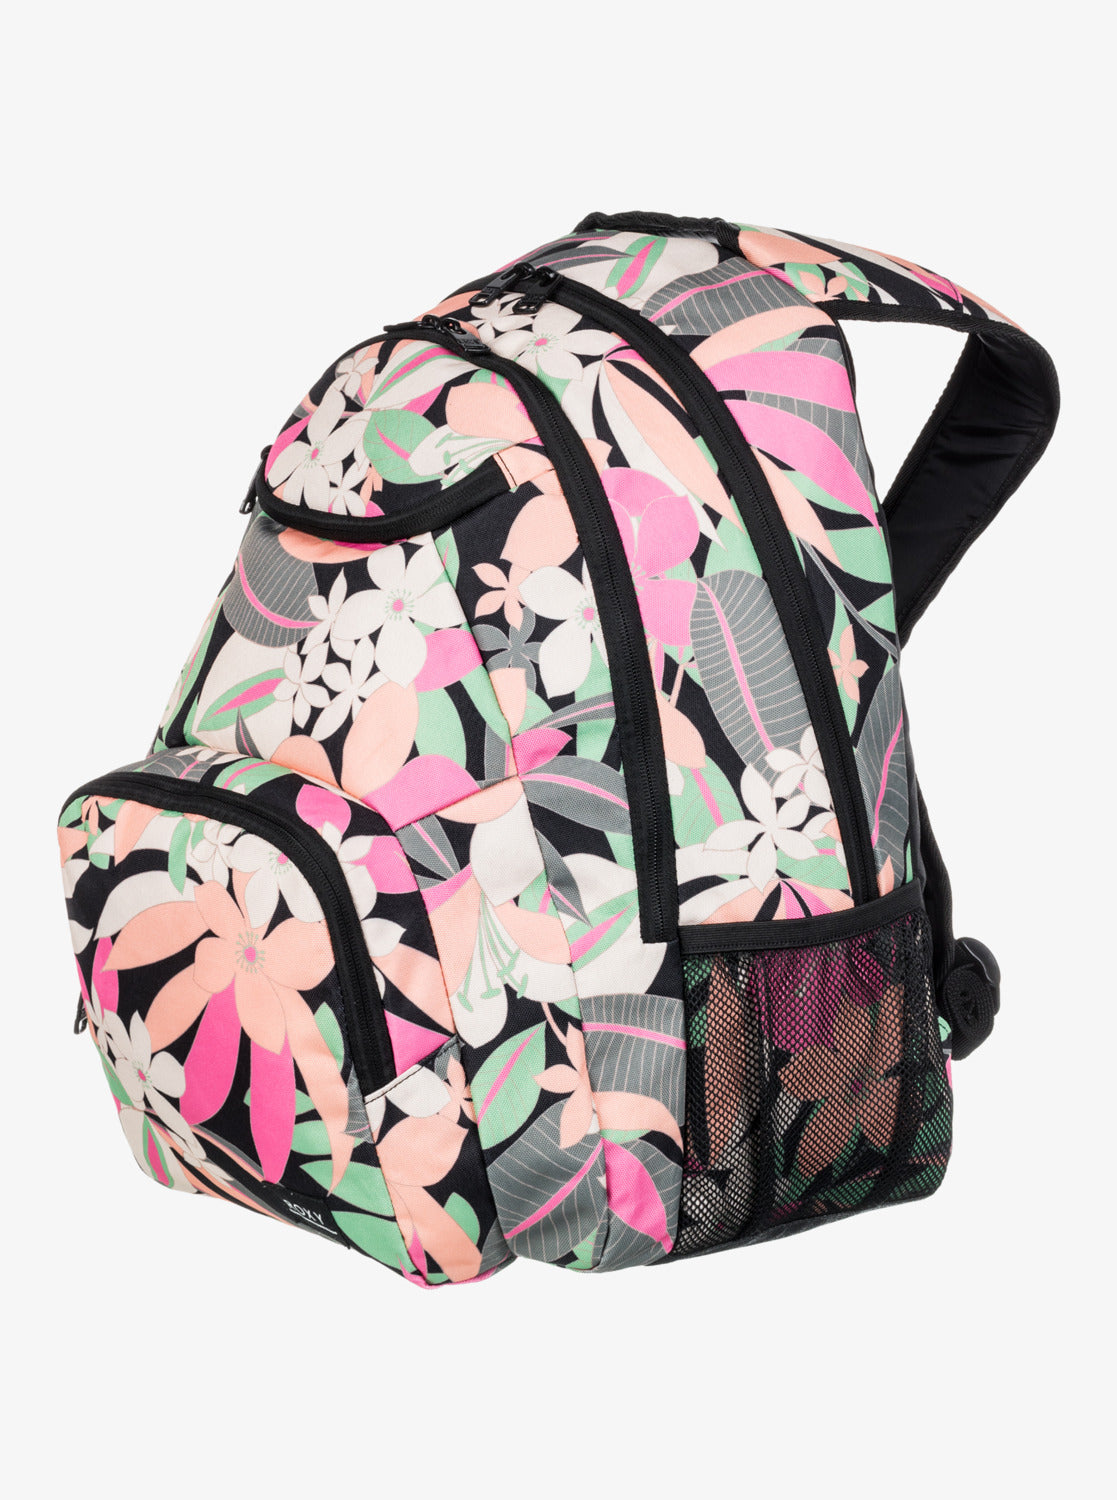 Roxy Shadow Swell 24L Medium Backpack in Anthracite Palm Song